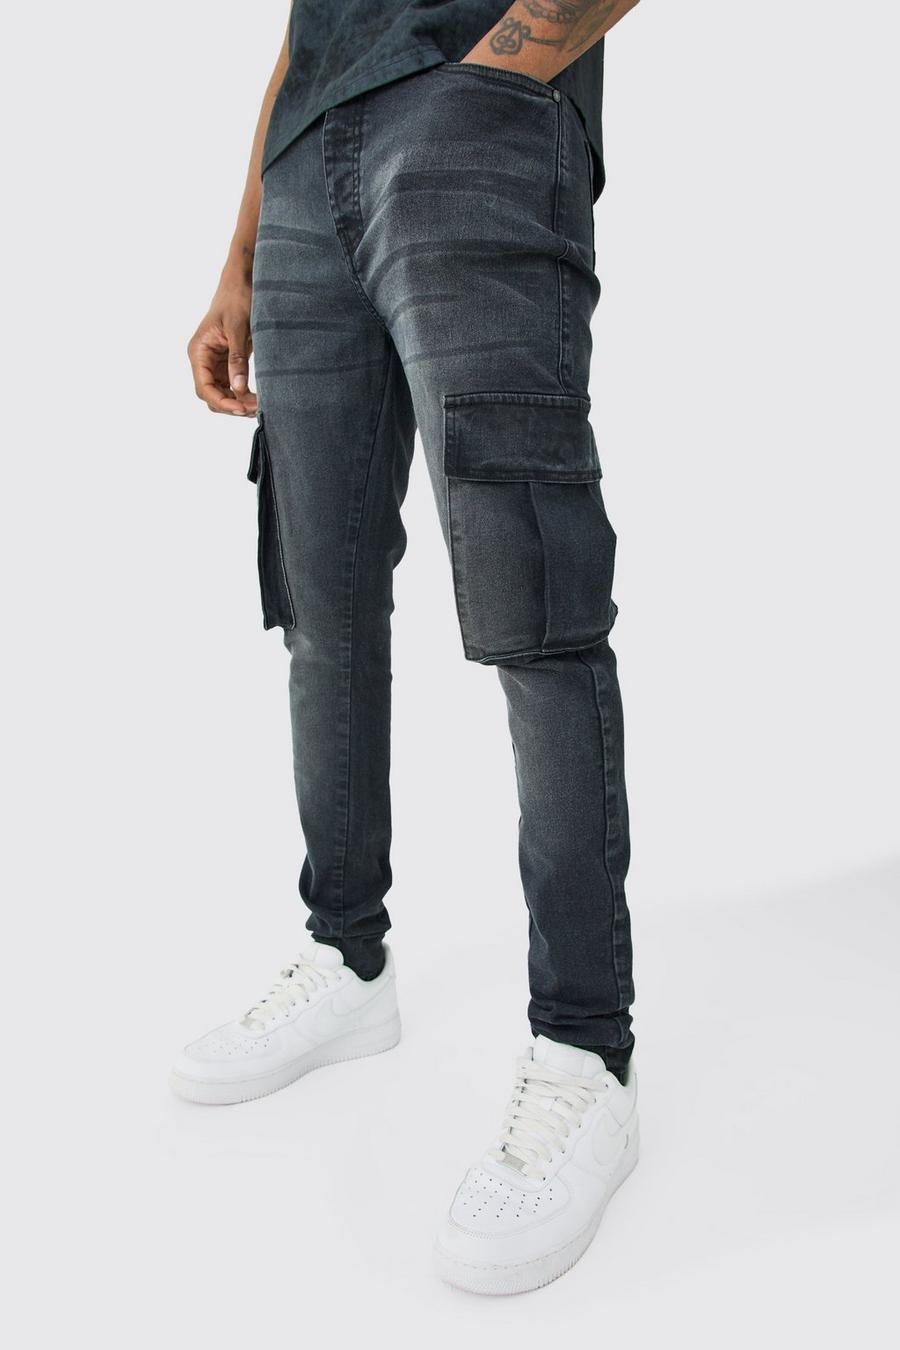 Washed black Tall Super skinny cargojeans